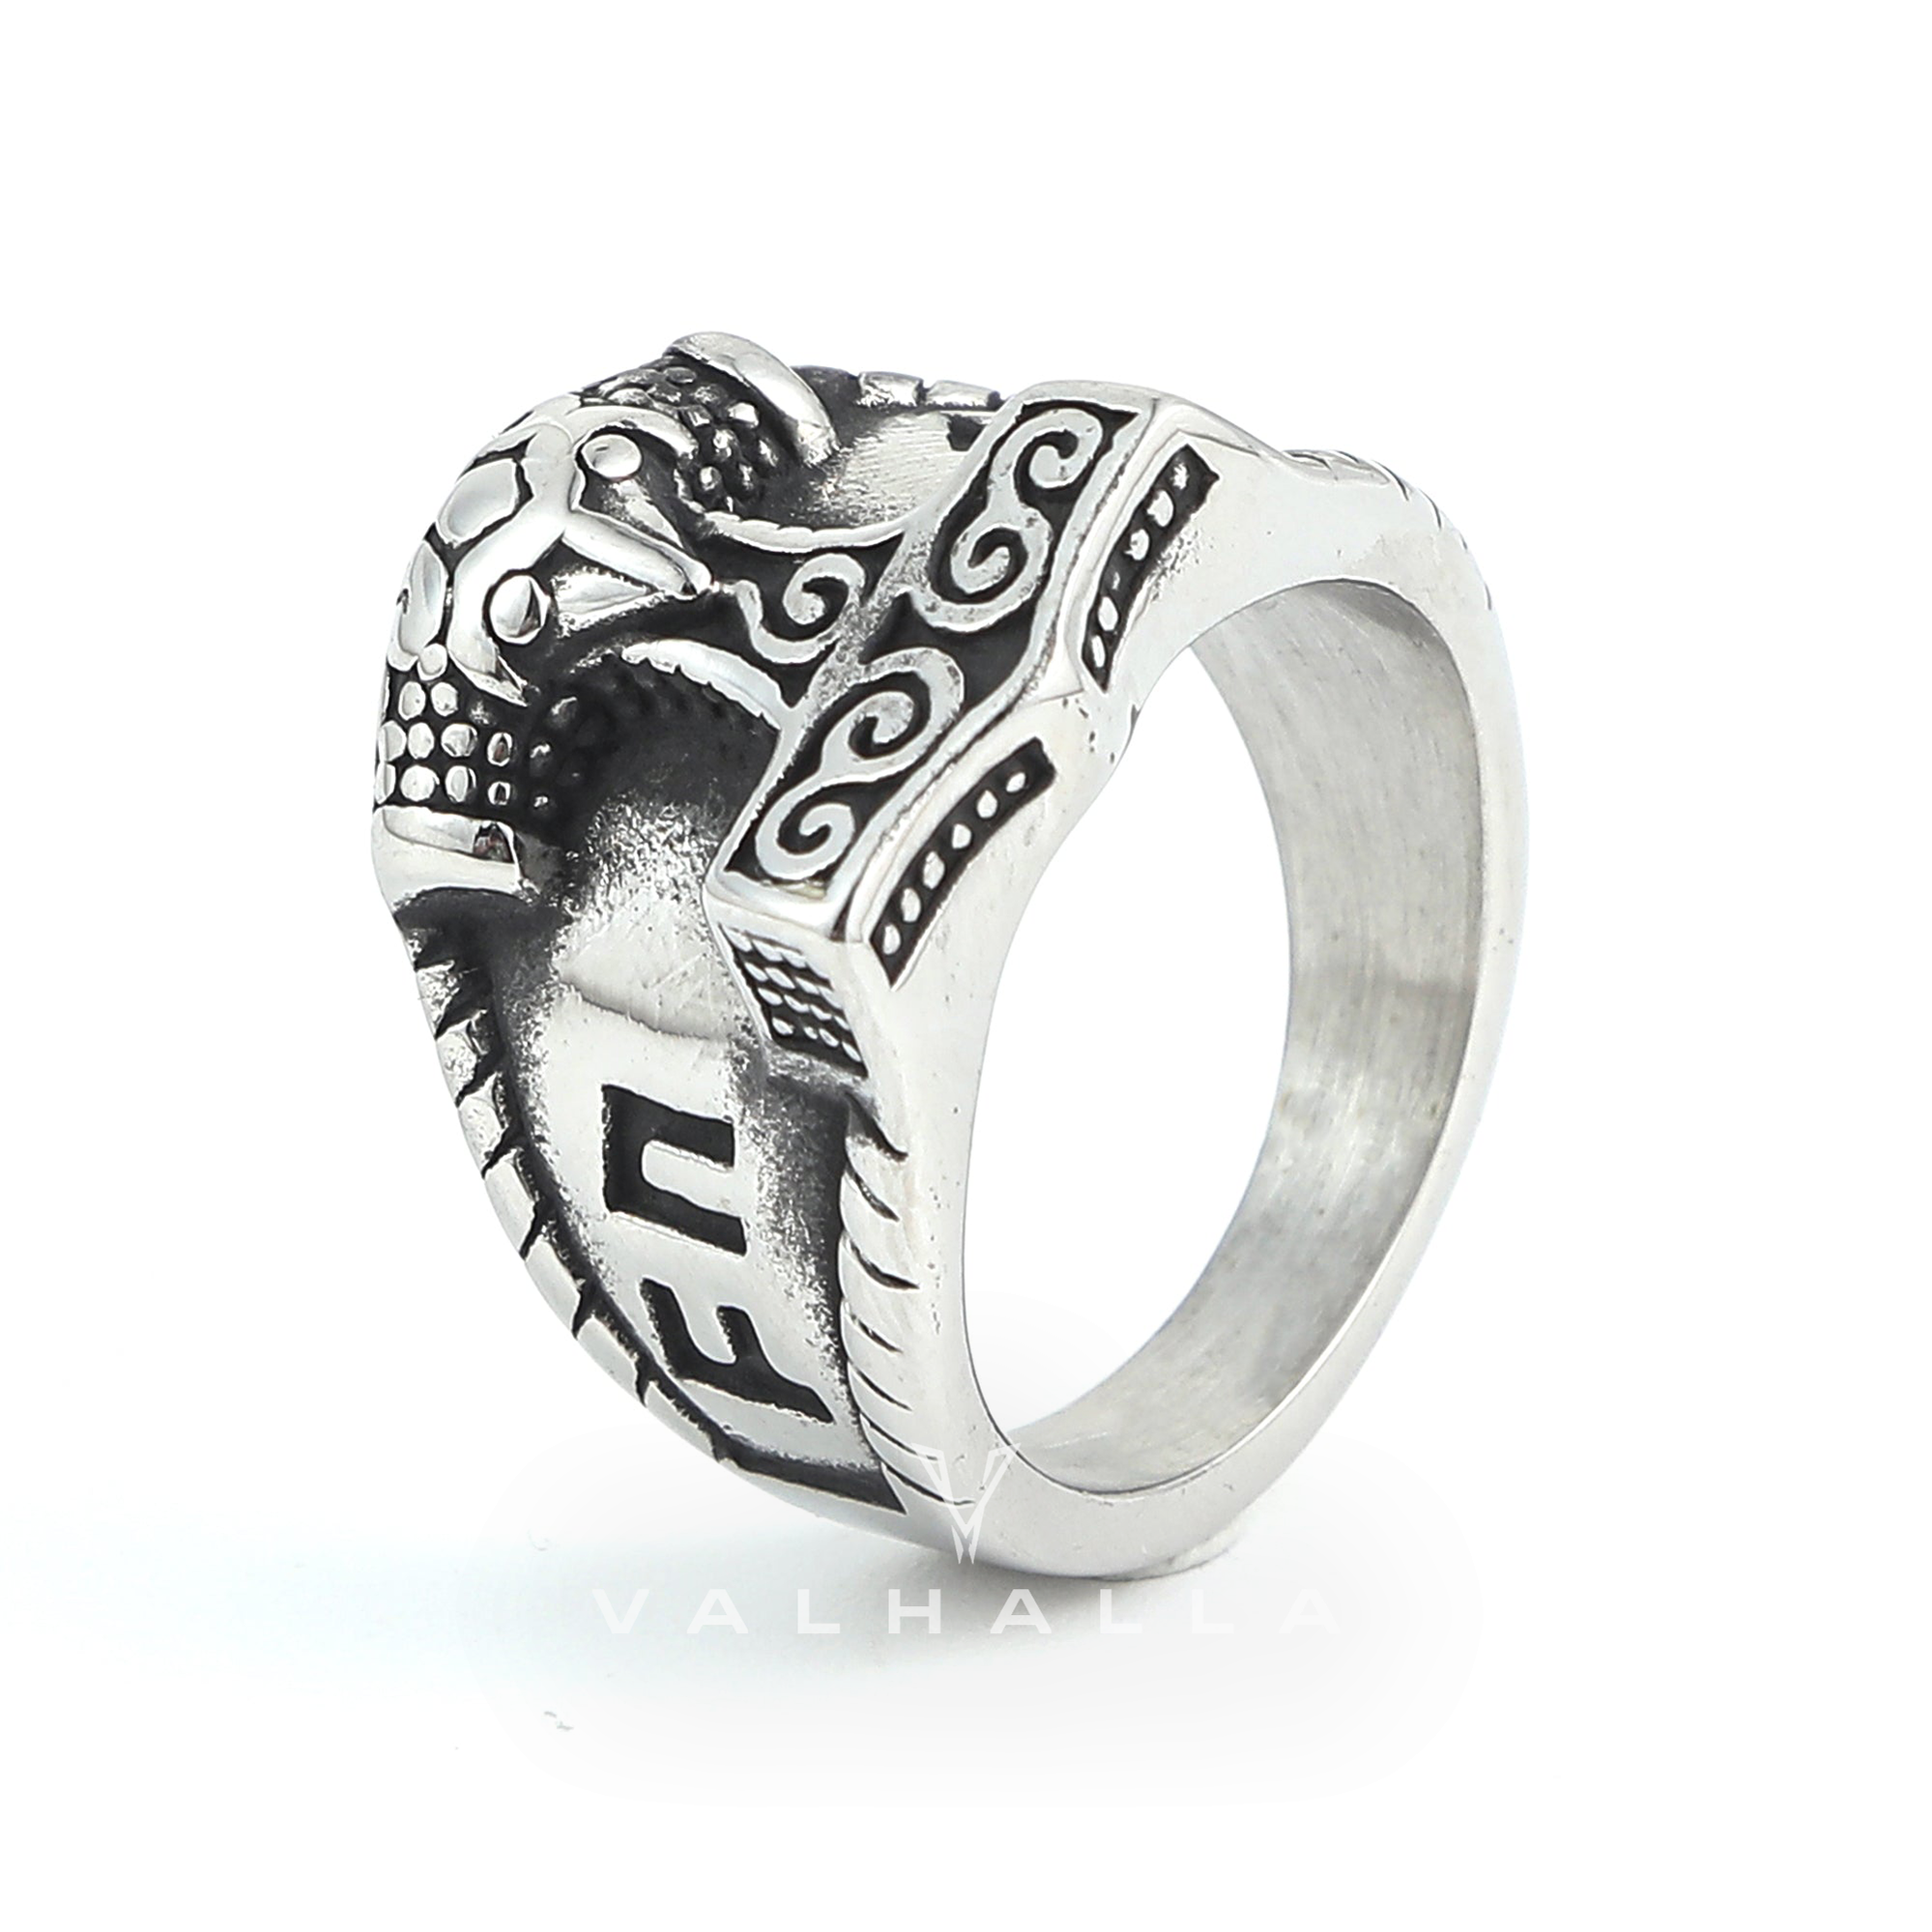 Handcrafted Stainless Steel Thor's Hammer and Rune Ring